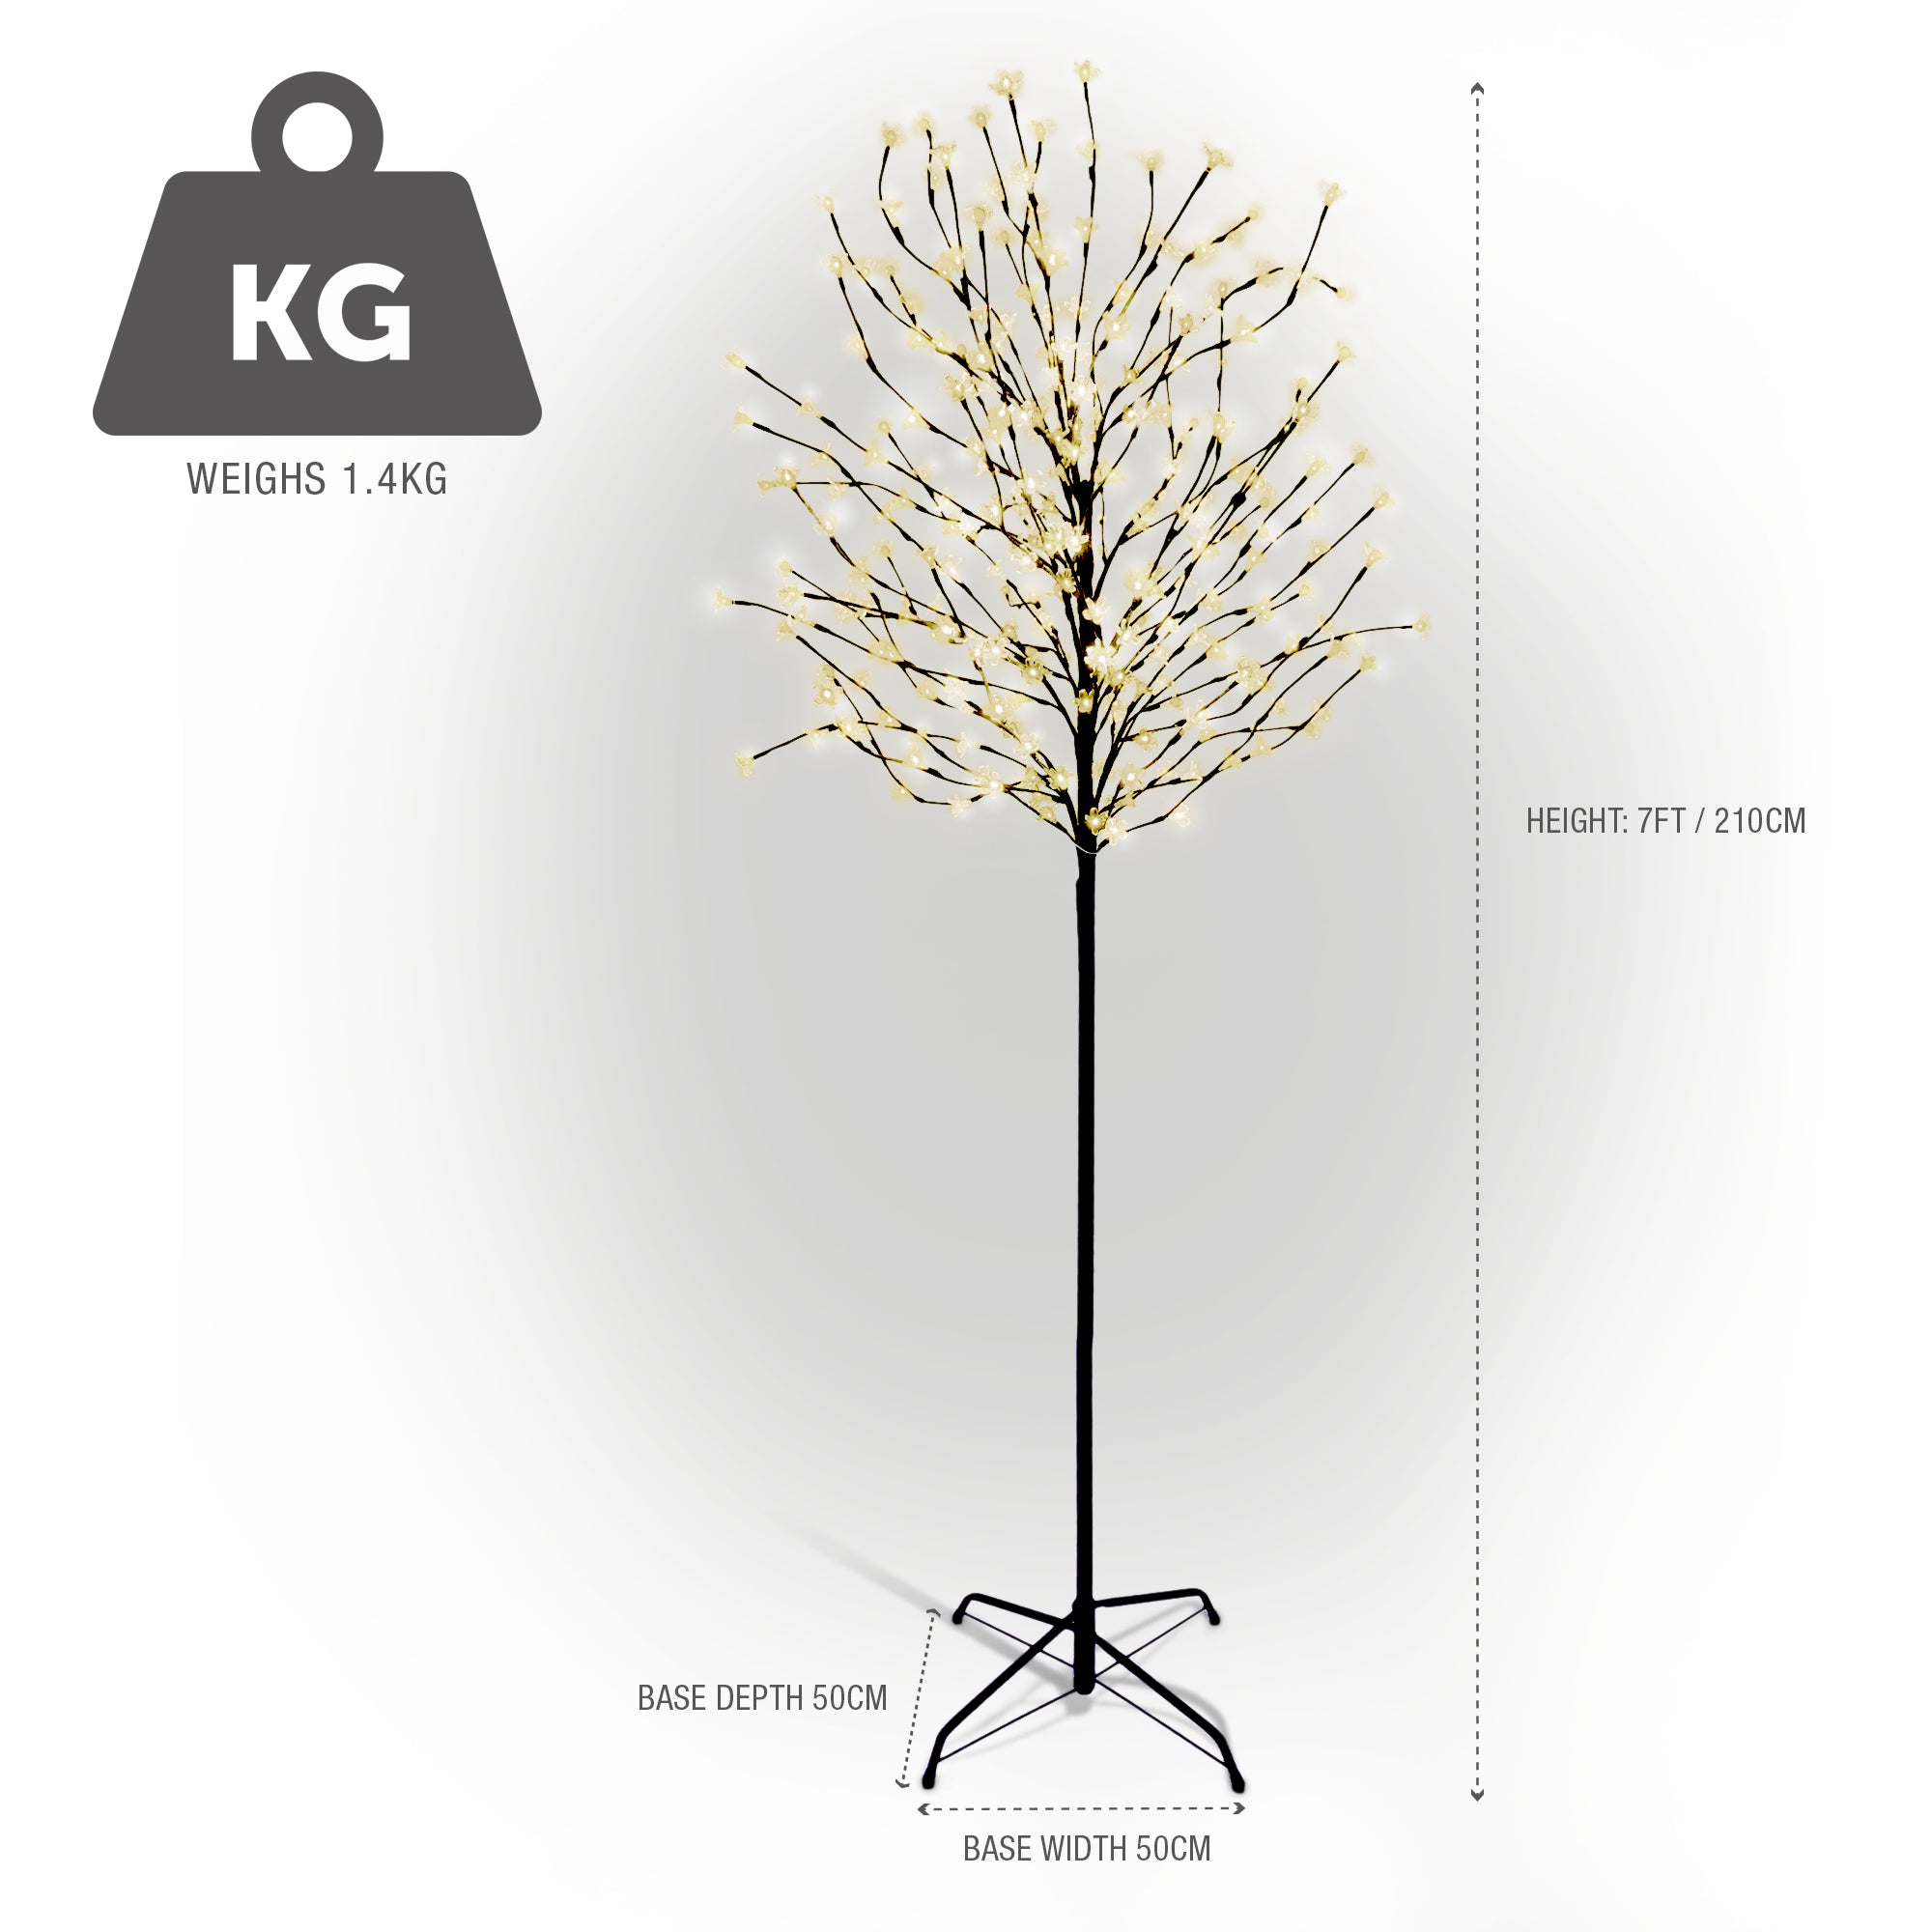 NETTA 7FT LED Cherry Blossom Tree, Pre-Lit 350 Lights, Auto-Off Timer and 8 Lighting Modes, 3M Power Cable, Suitable for Indoor and Outdoor Use - Warm White